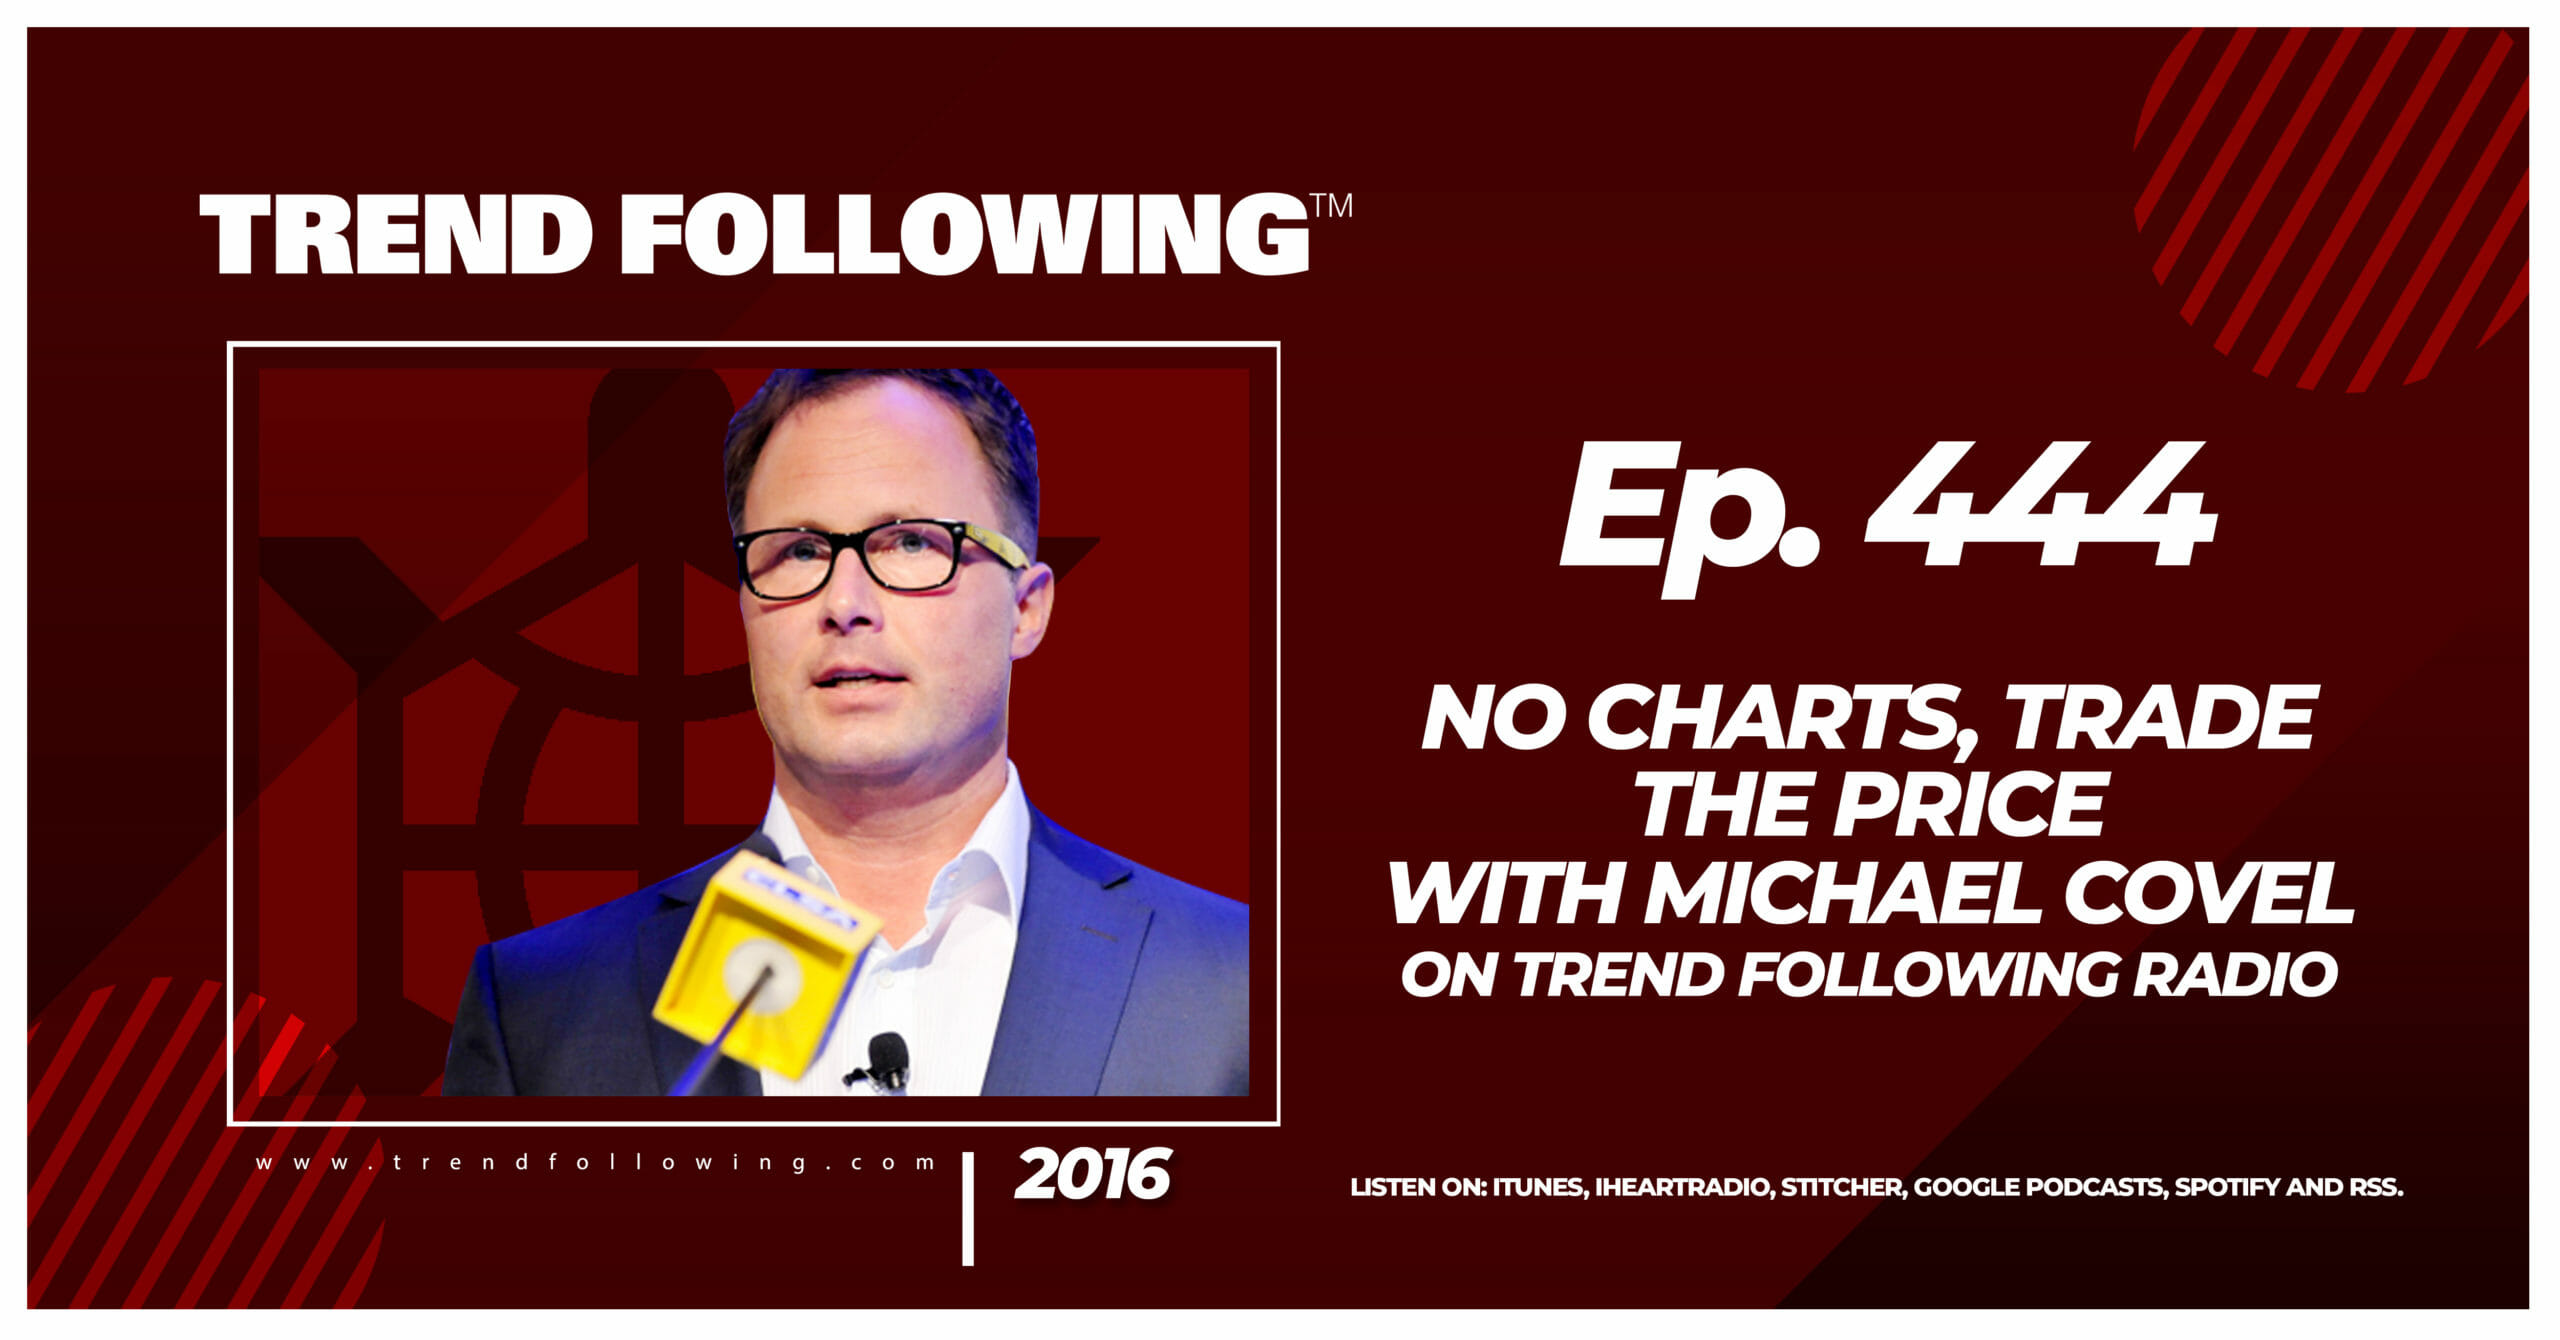 No Charts, Trade the Price with Michael Covel on Trend Following Radio